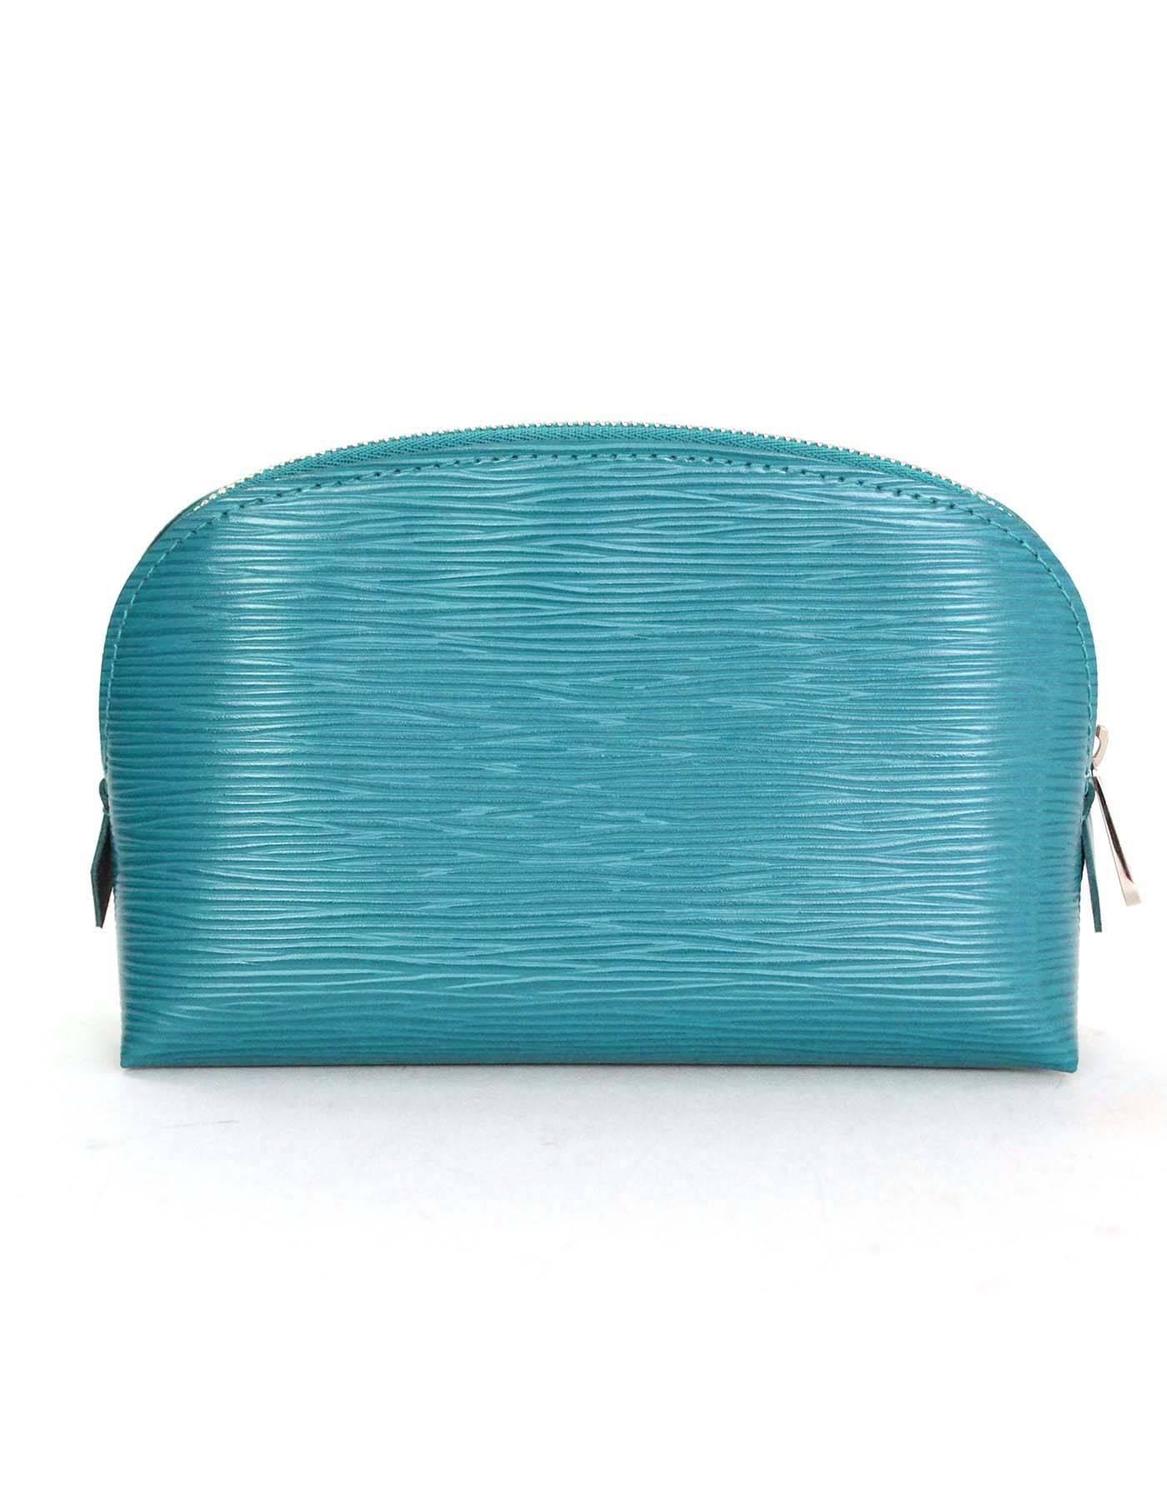 Louis Vuitton Cyan Epi Leather Cosmetic Pouch Clutch rt. $460 For Sale at 1stdibs